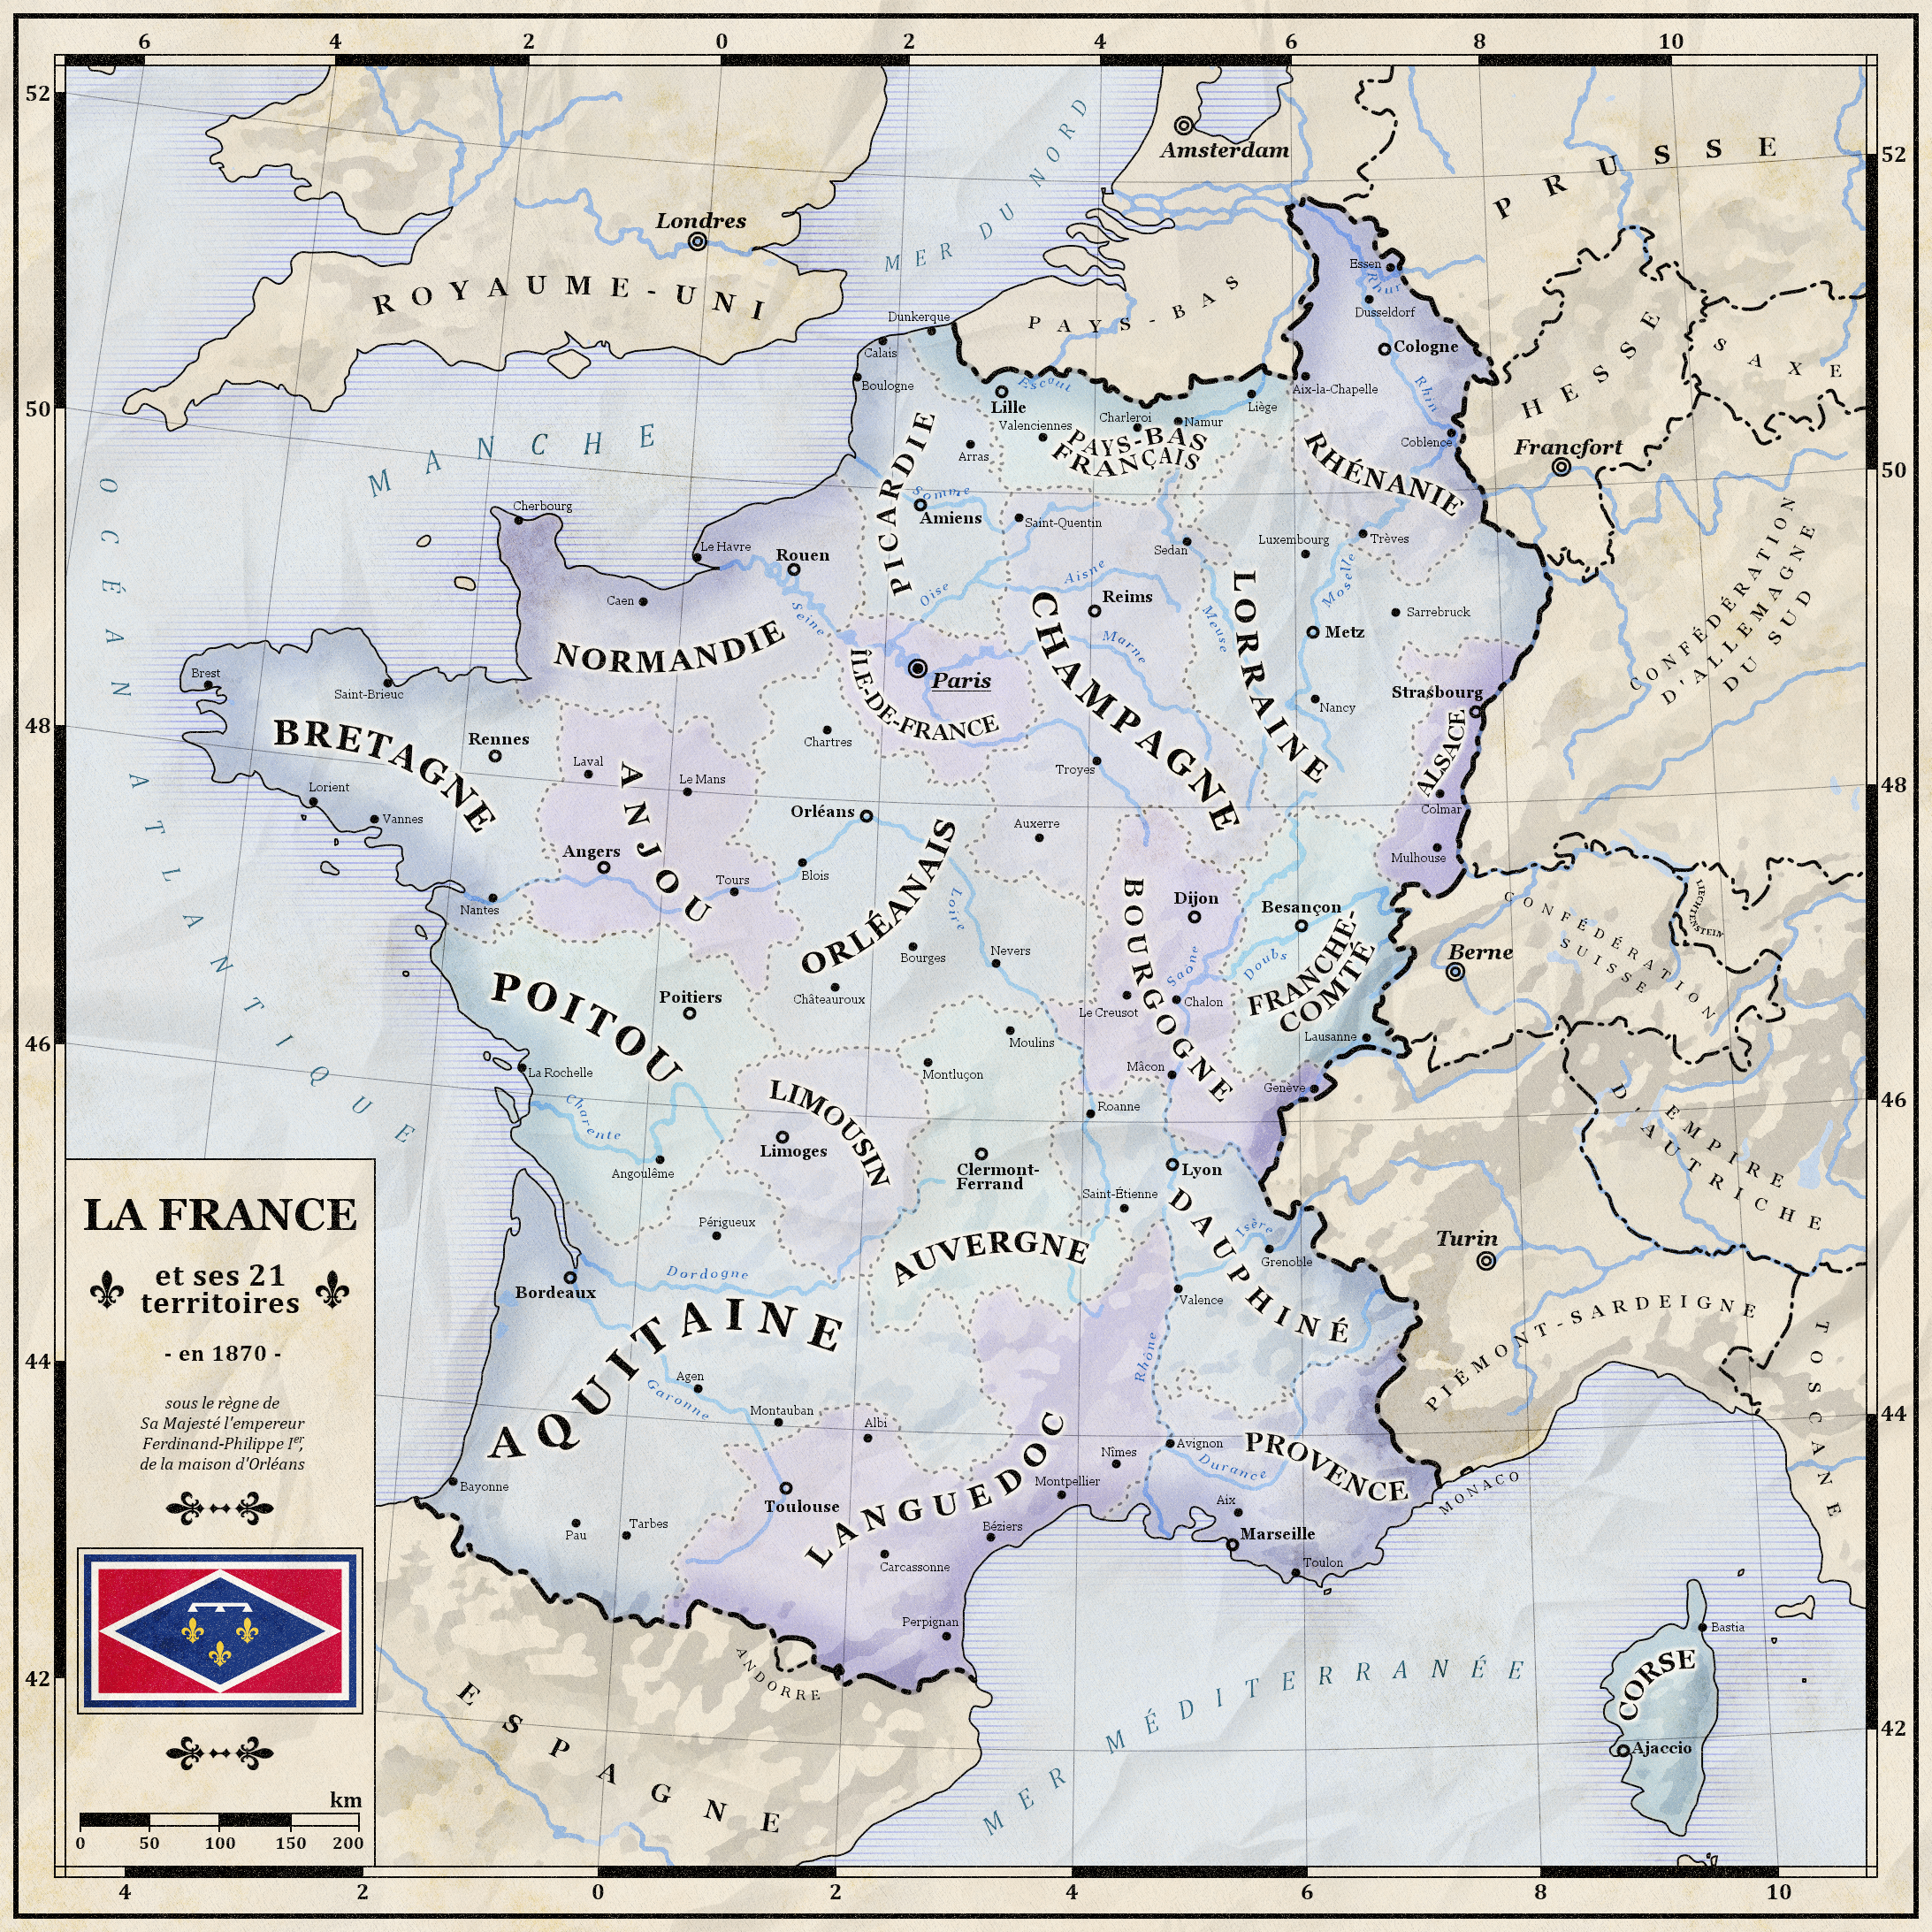 What France should have been by ZalringDA